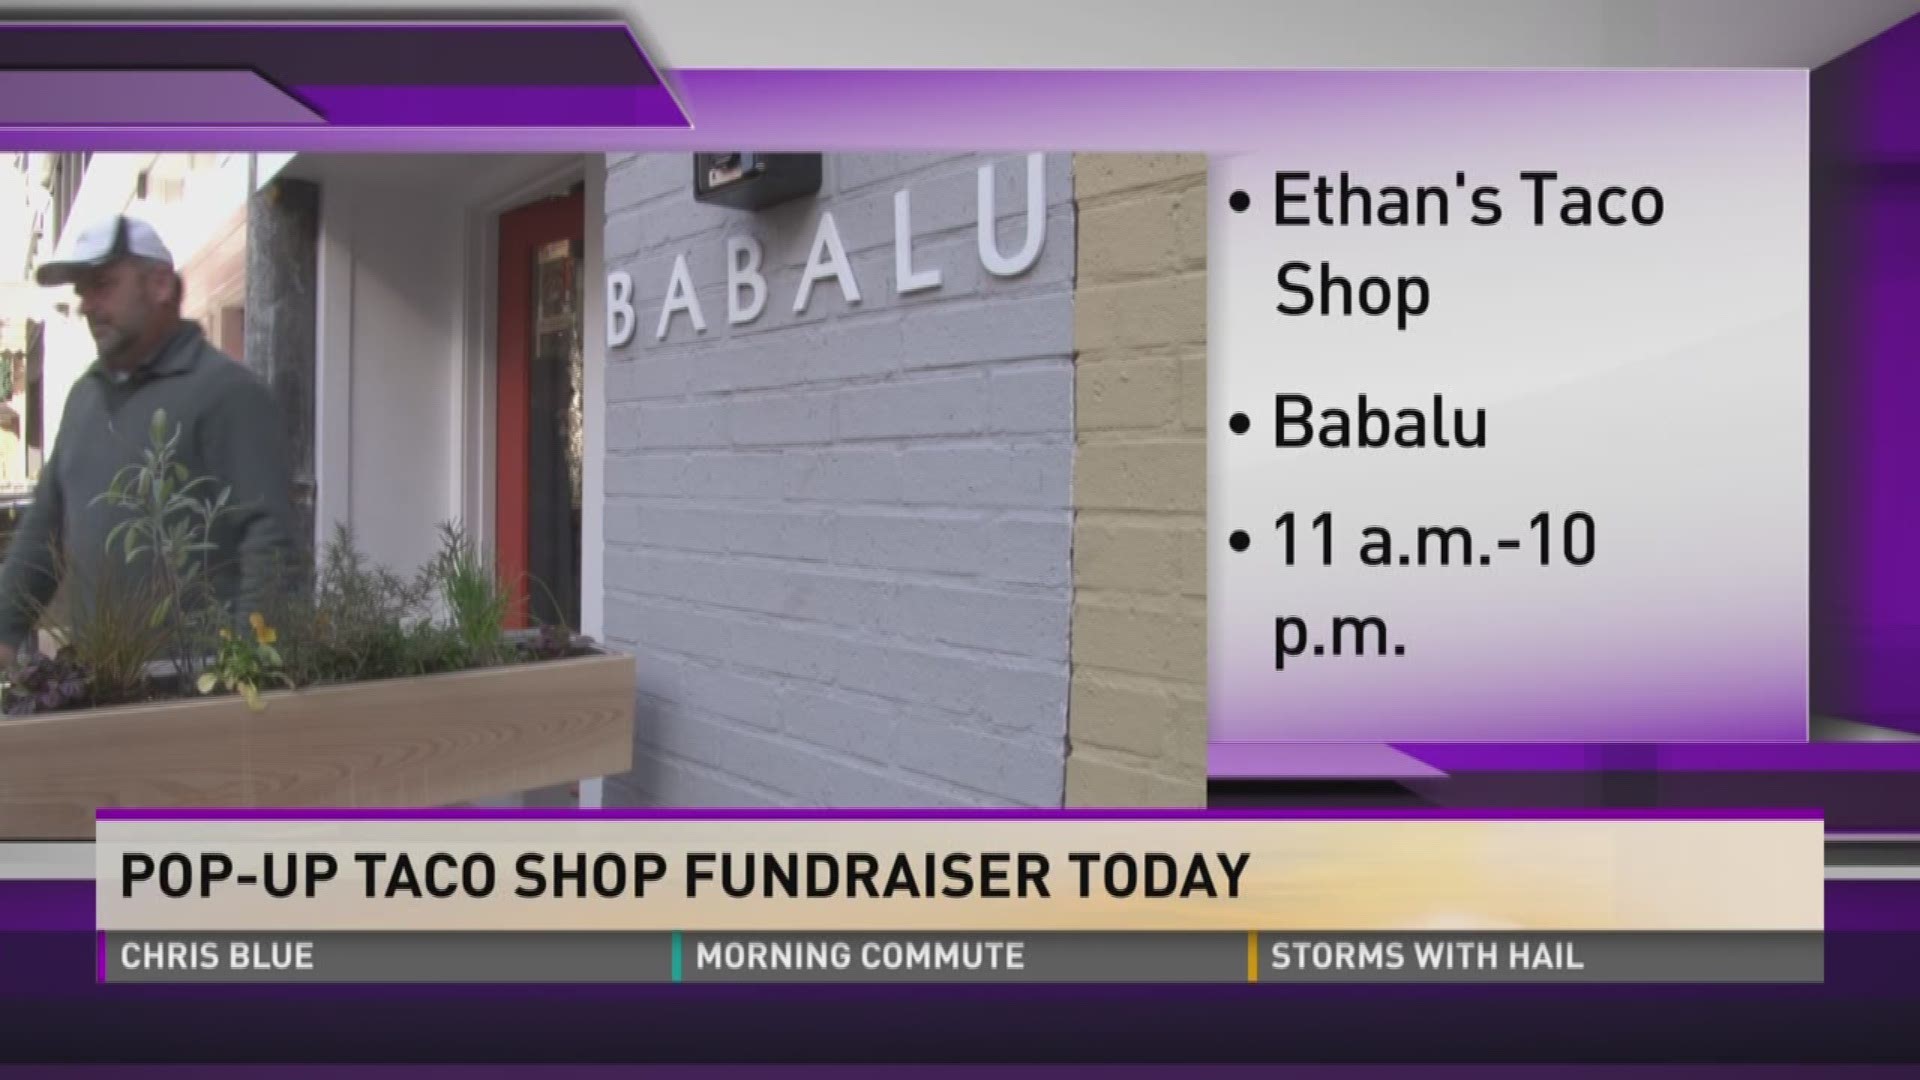 The pop-up taco fundraiser is to raise money for Ethan Woodruff, who is a 10-year-old Knoxville boy recovering from a traumatic brain injury.